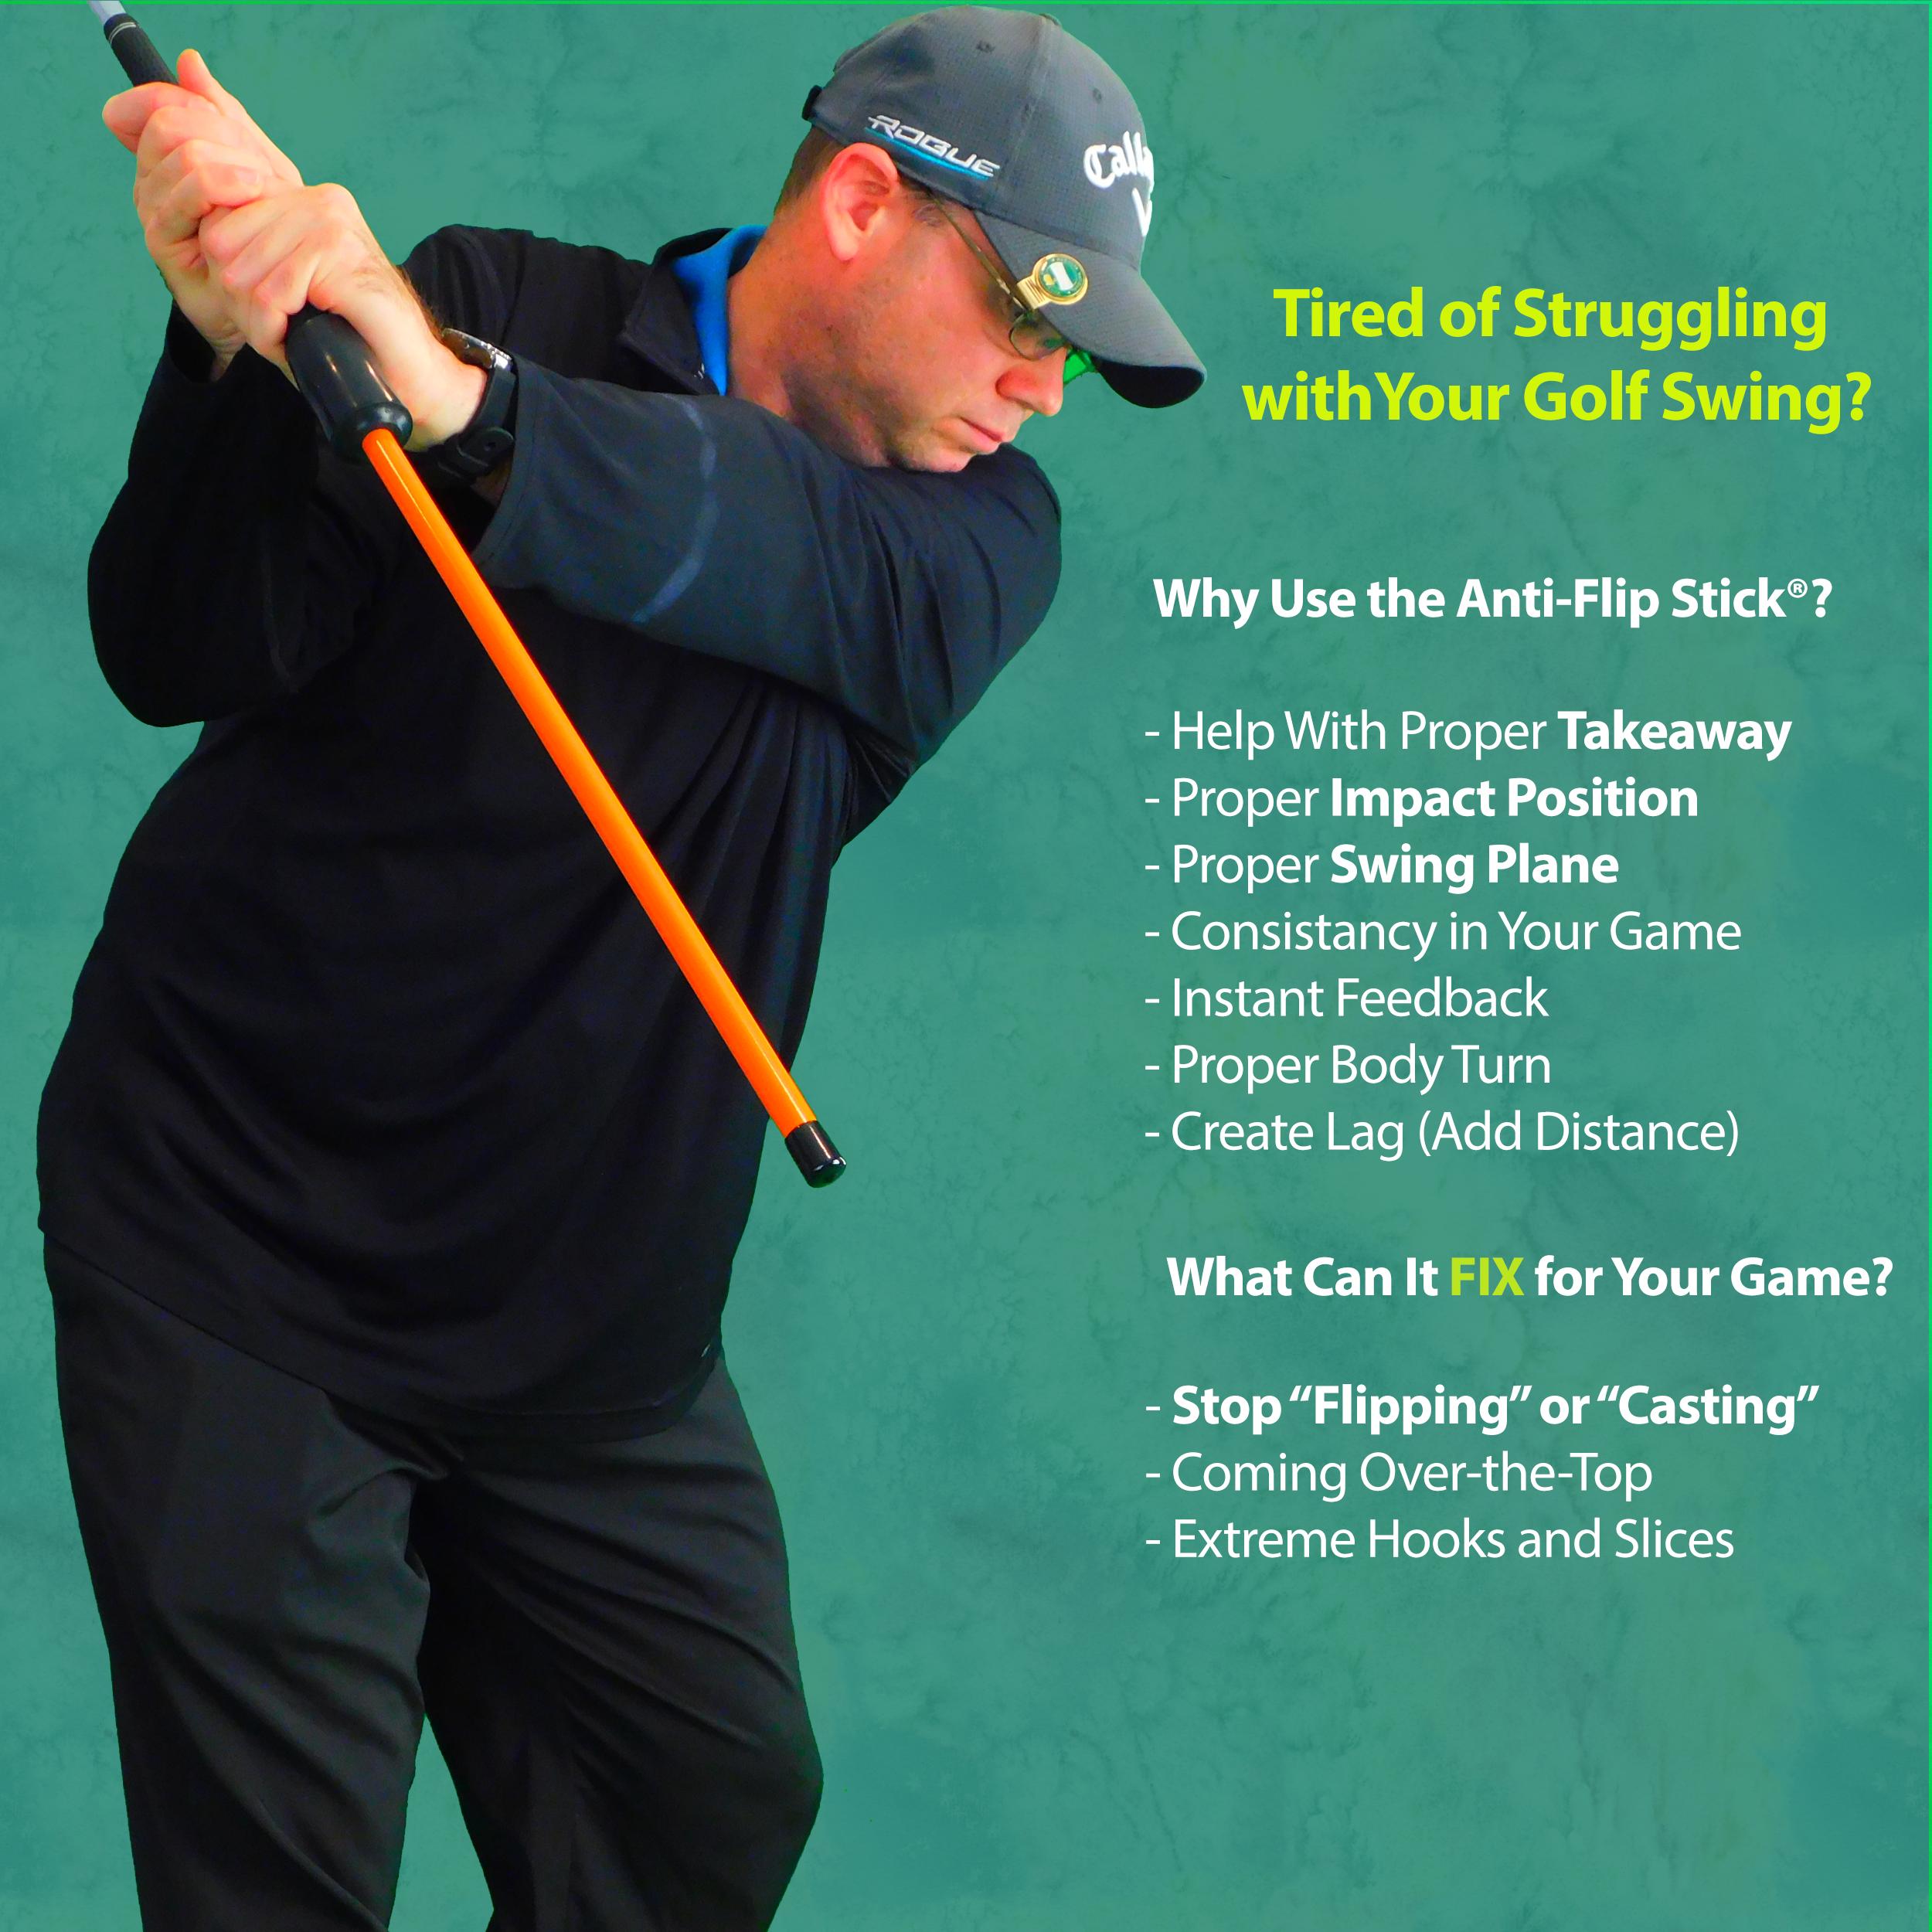 How to Improve Your Backswing Golf
